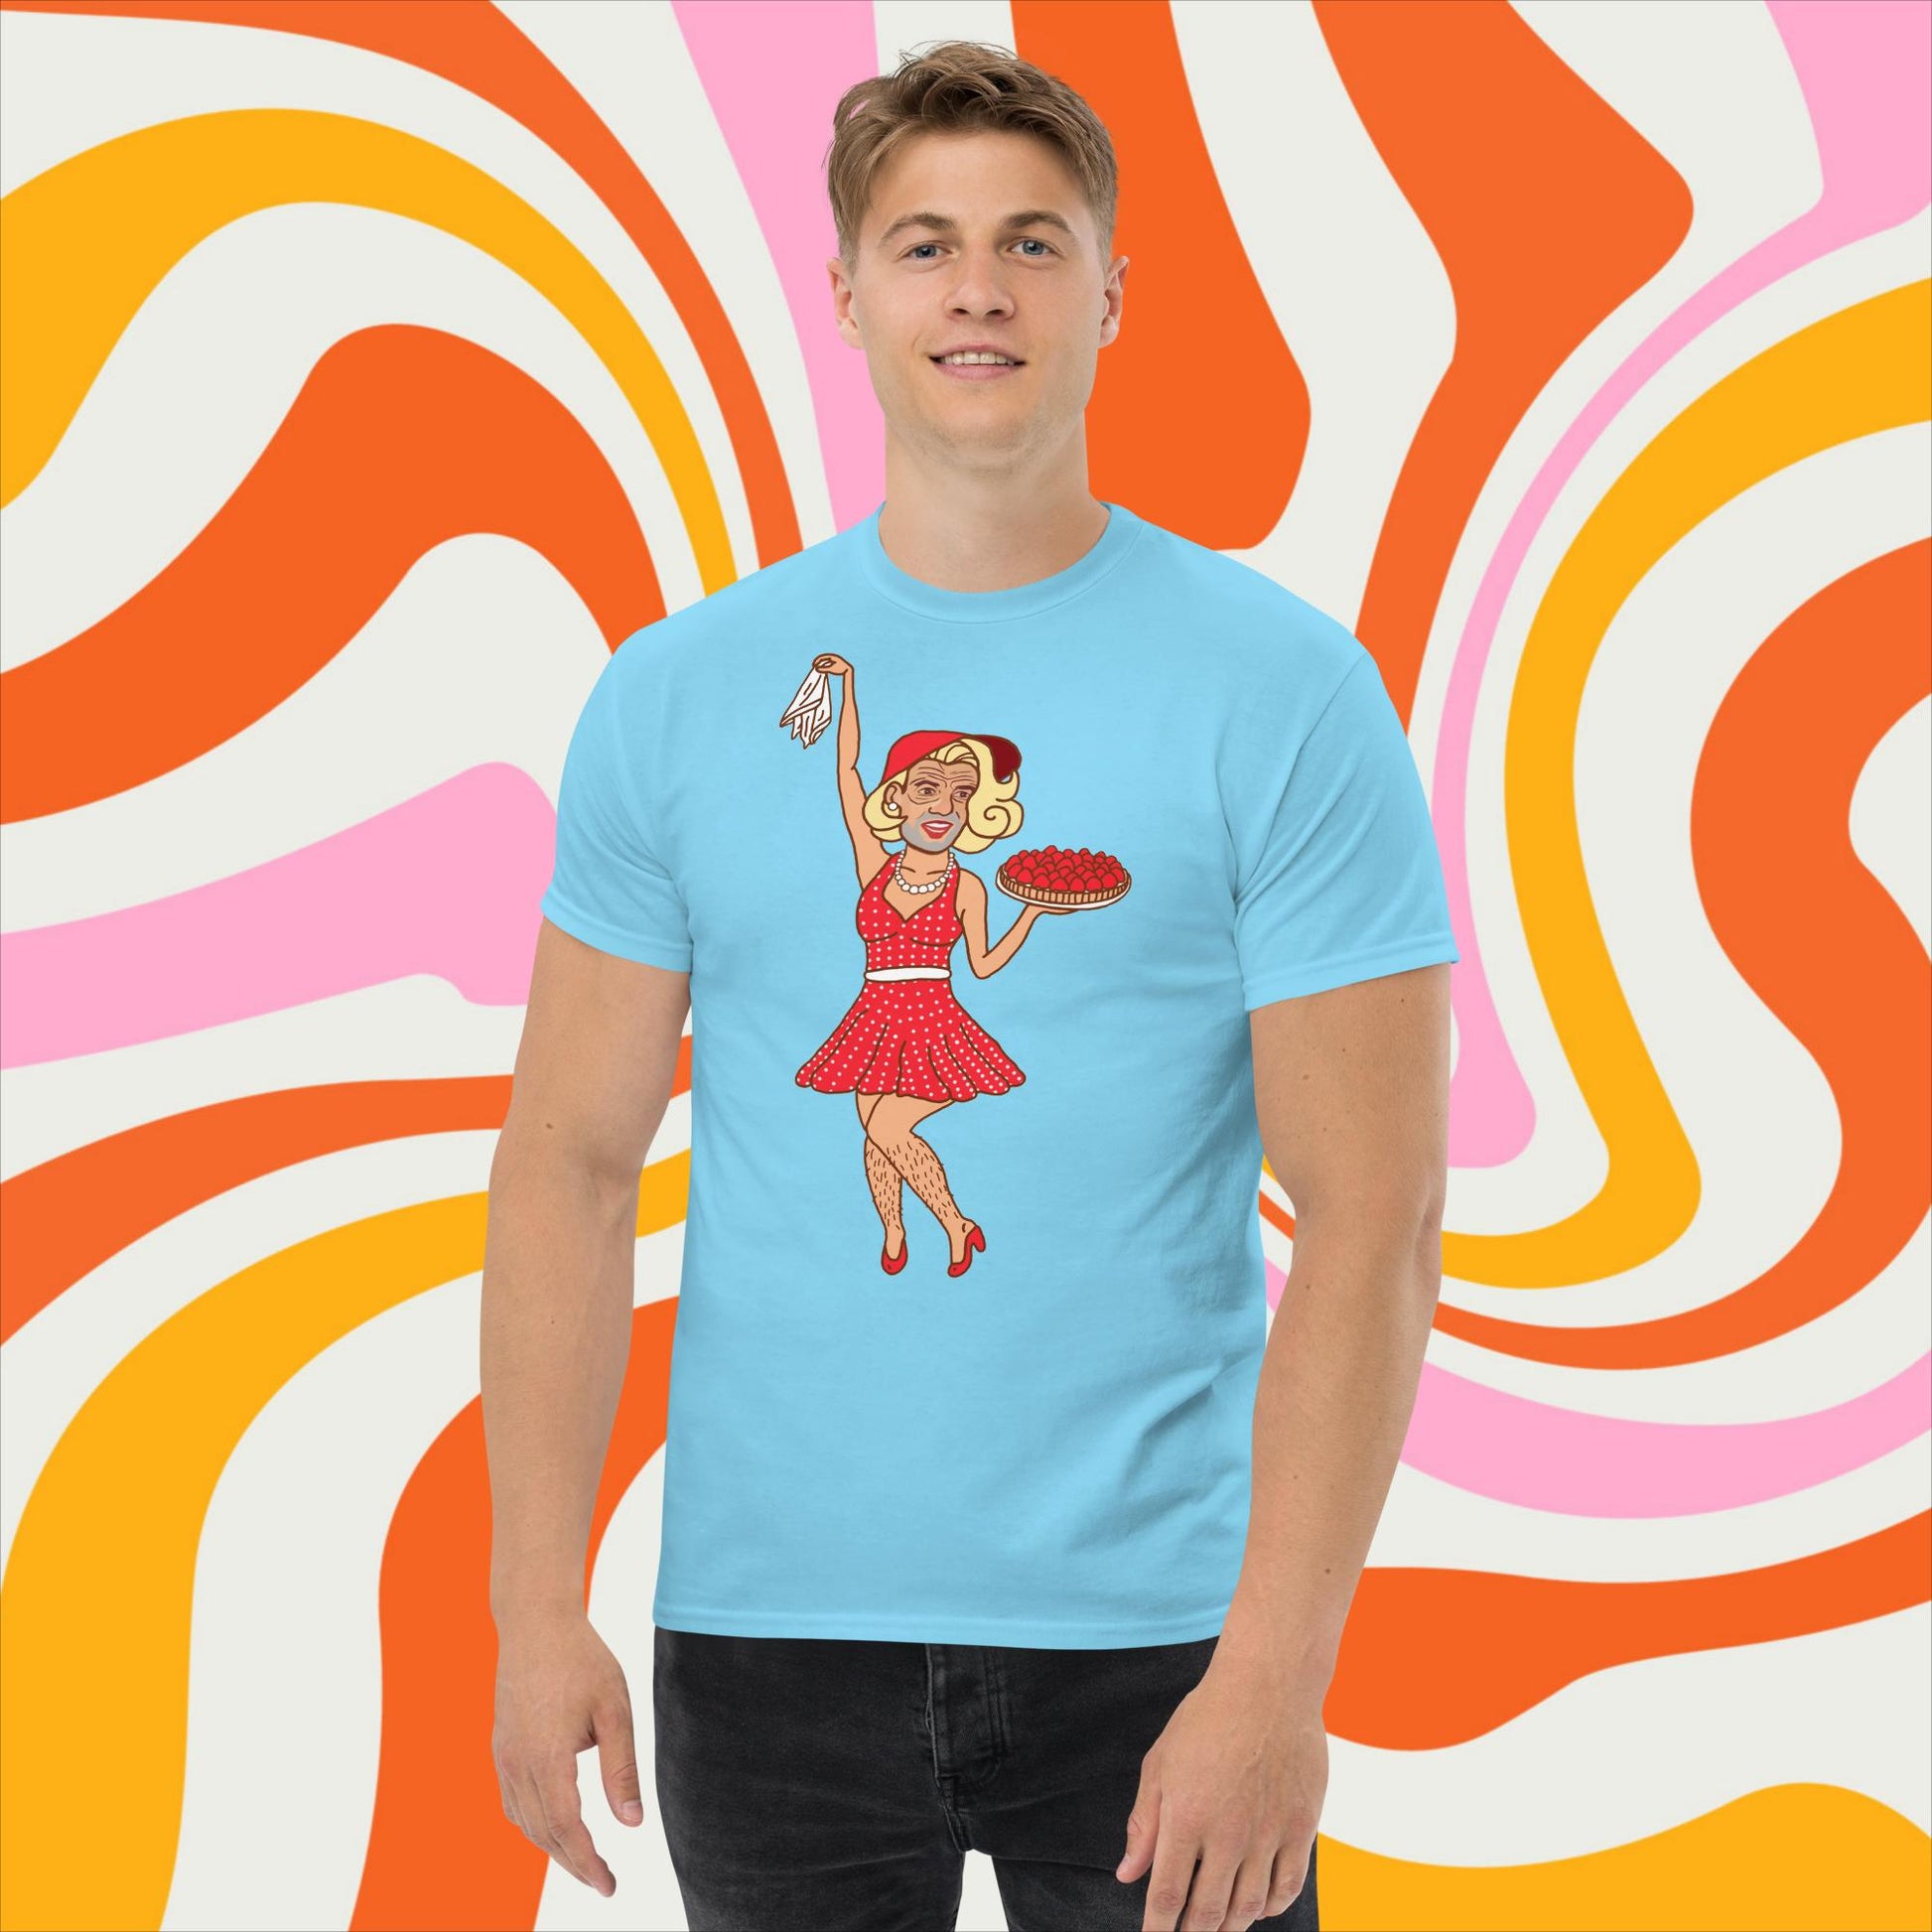 Thinnn Boy Bake Club The Fighter and The Kid TFATK Podcast Comedy 60s retro housewife Bryan Callen T-shirt Next Cult Brand